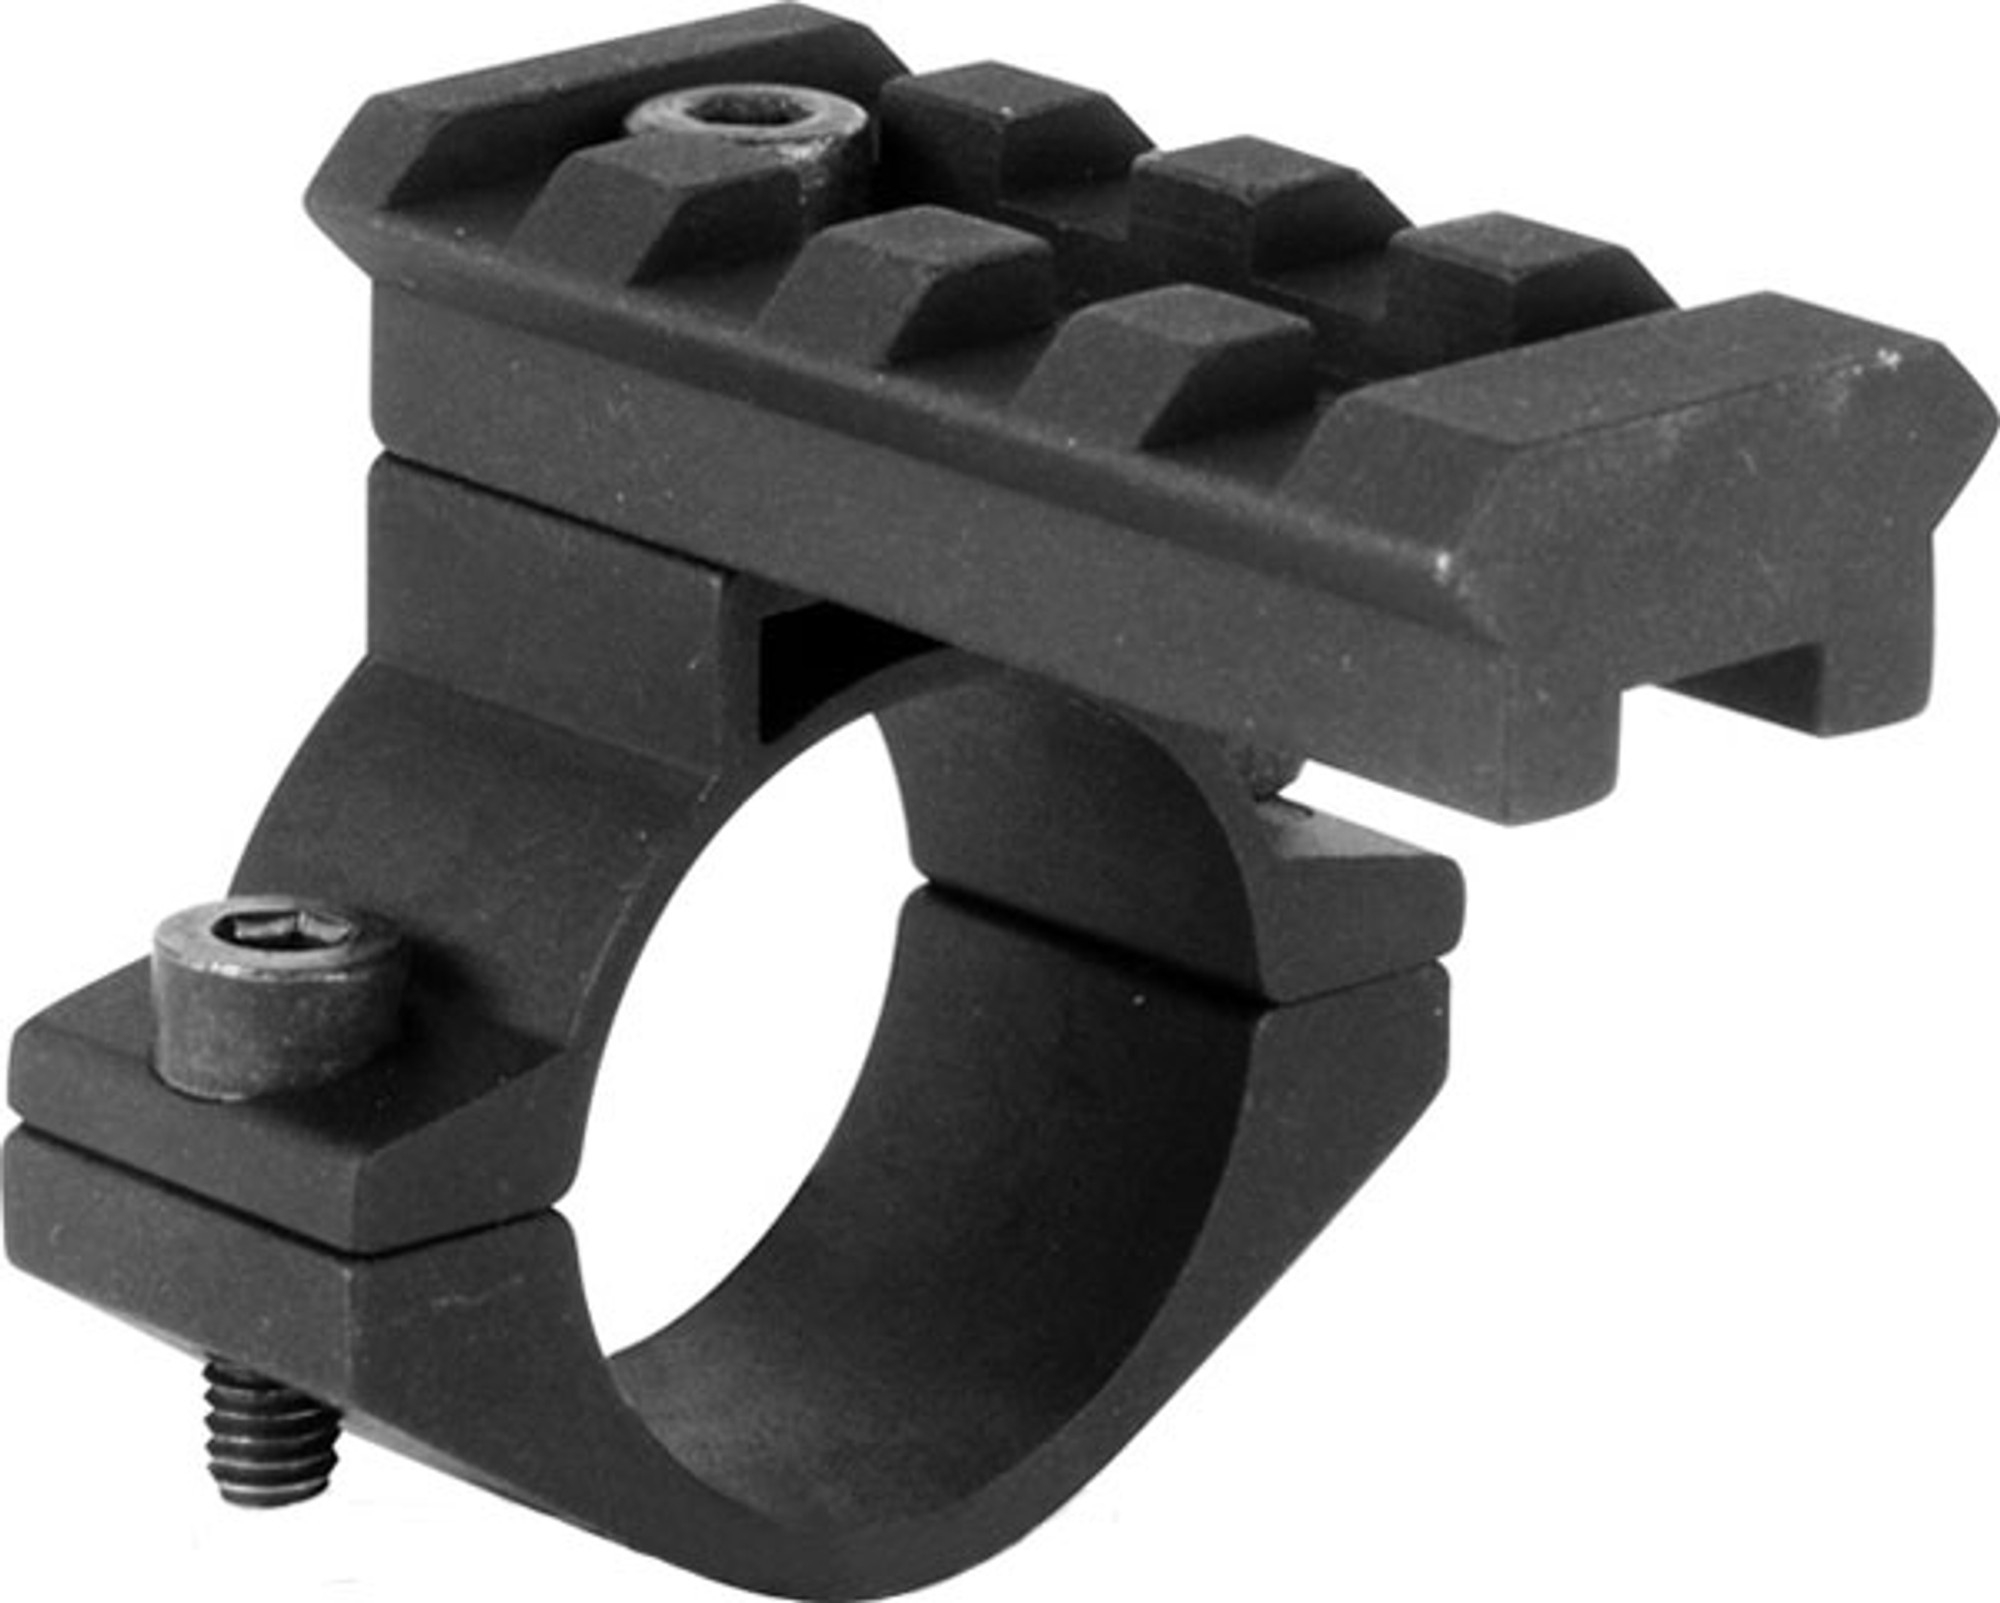 AIM Sports 36mm Cylinder / Scope Adapter Rail Extension